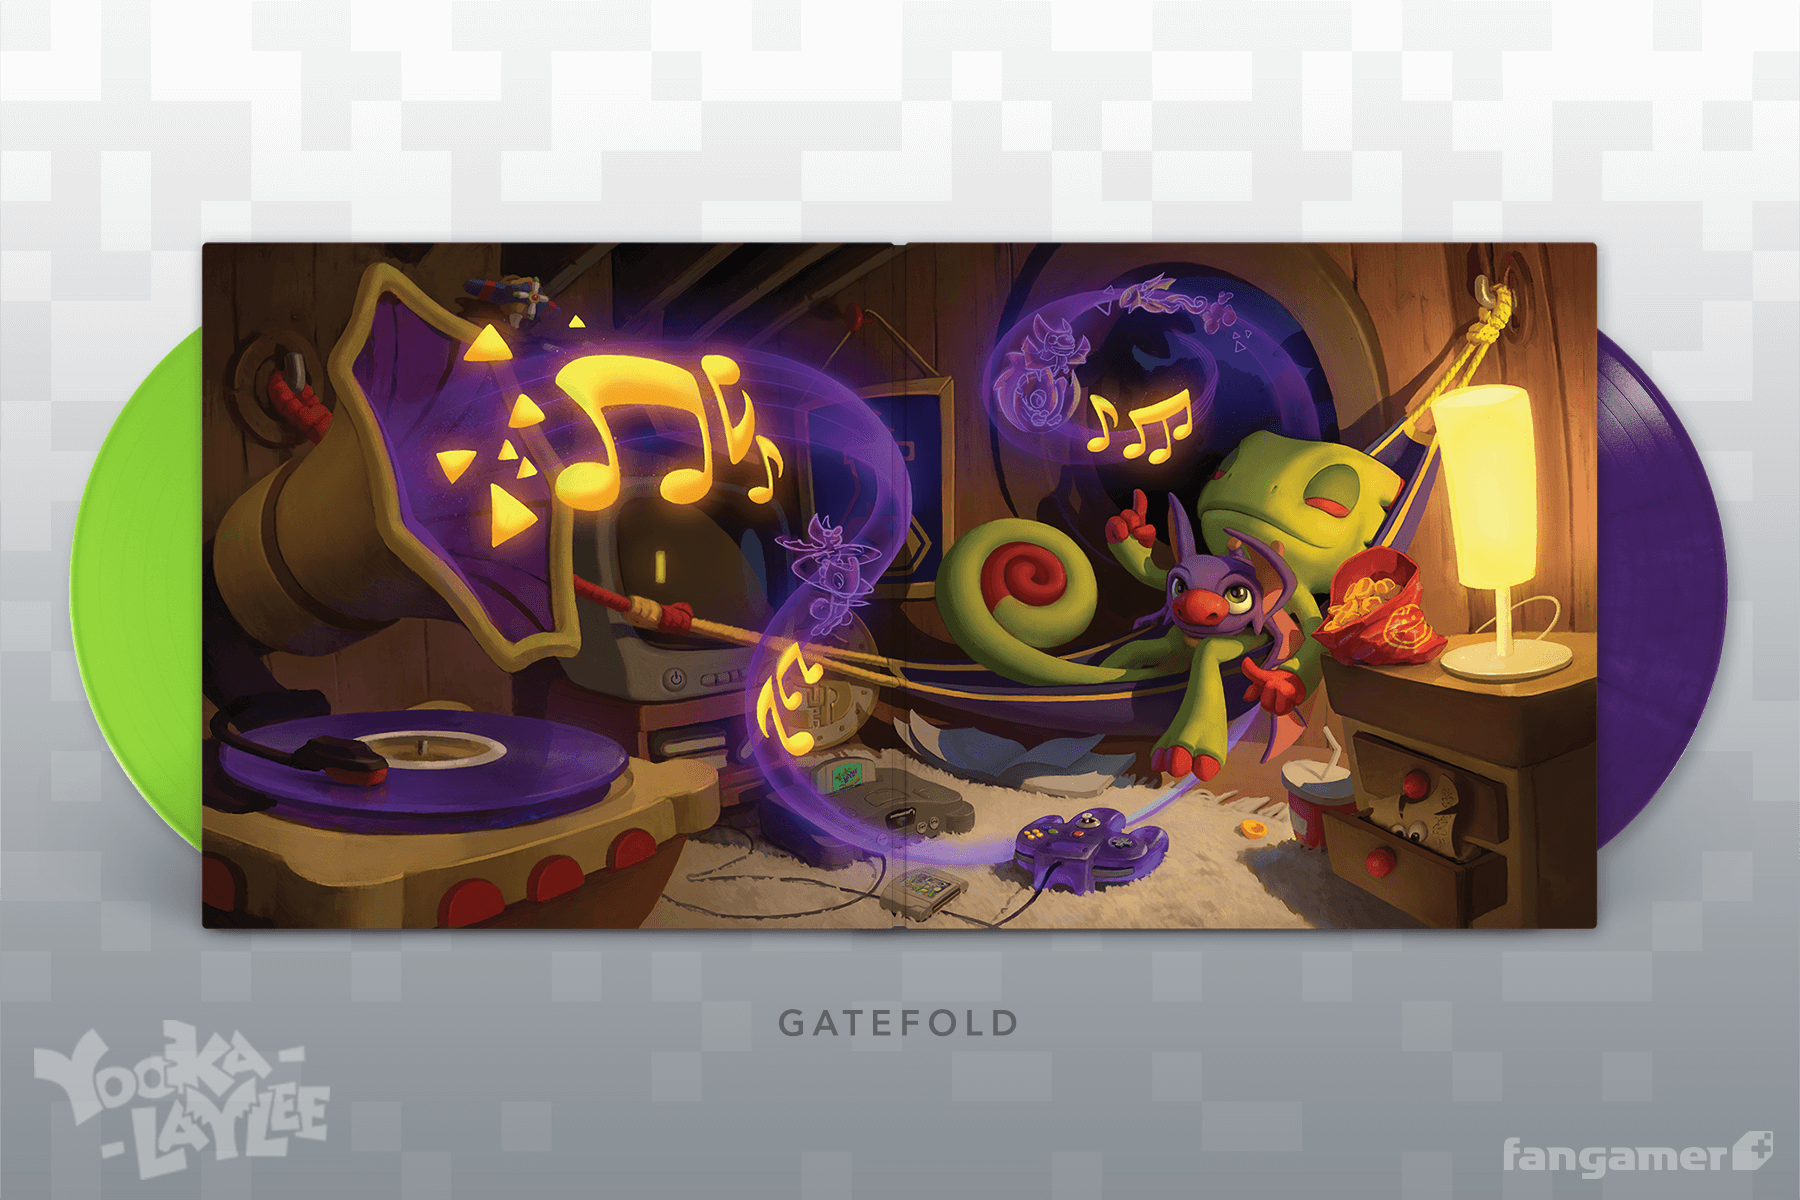 Yooka-Laylee and the Impossible Lair Soundtrack on Double Vinyl with Open Gatefold Sleeve